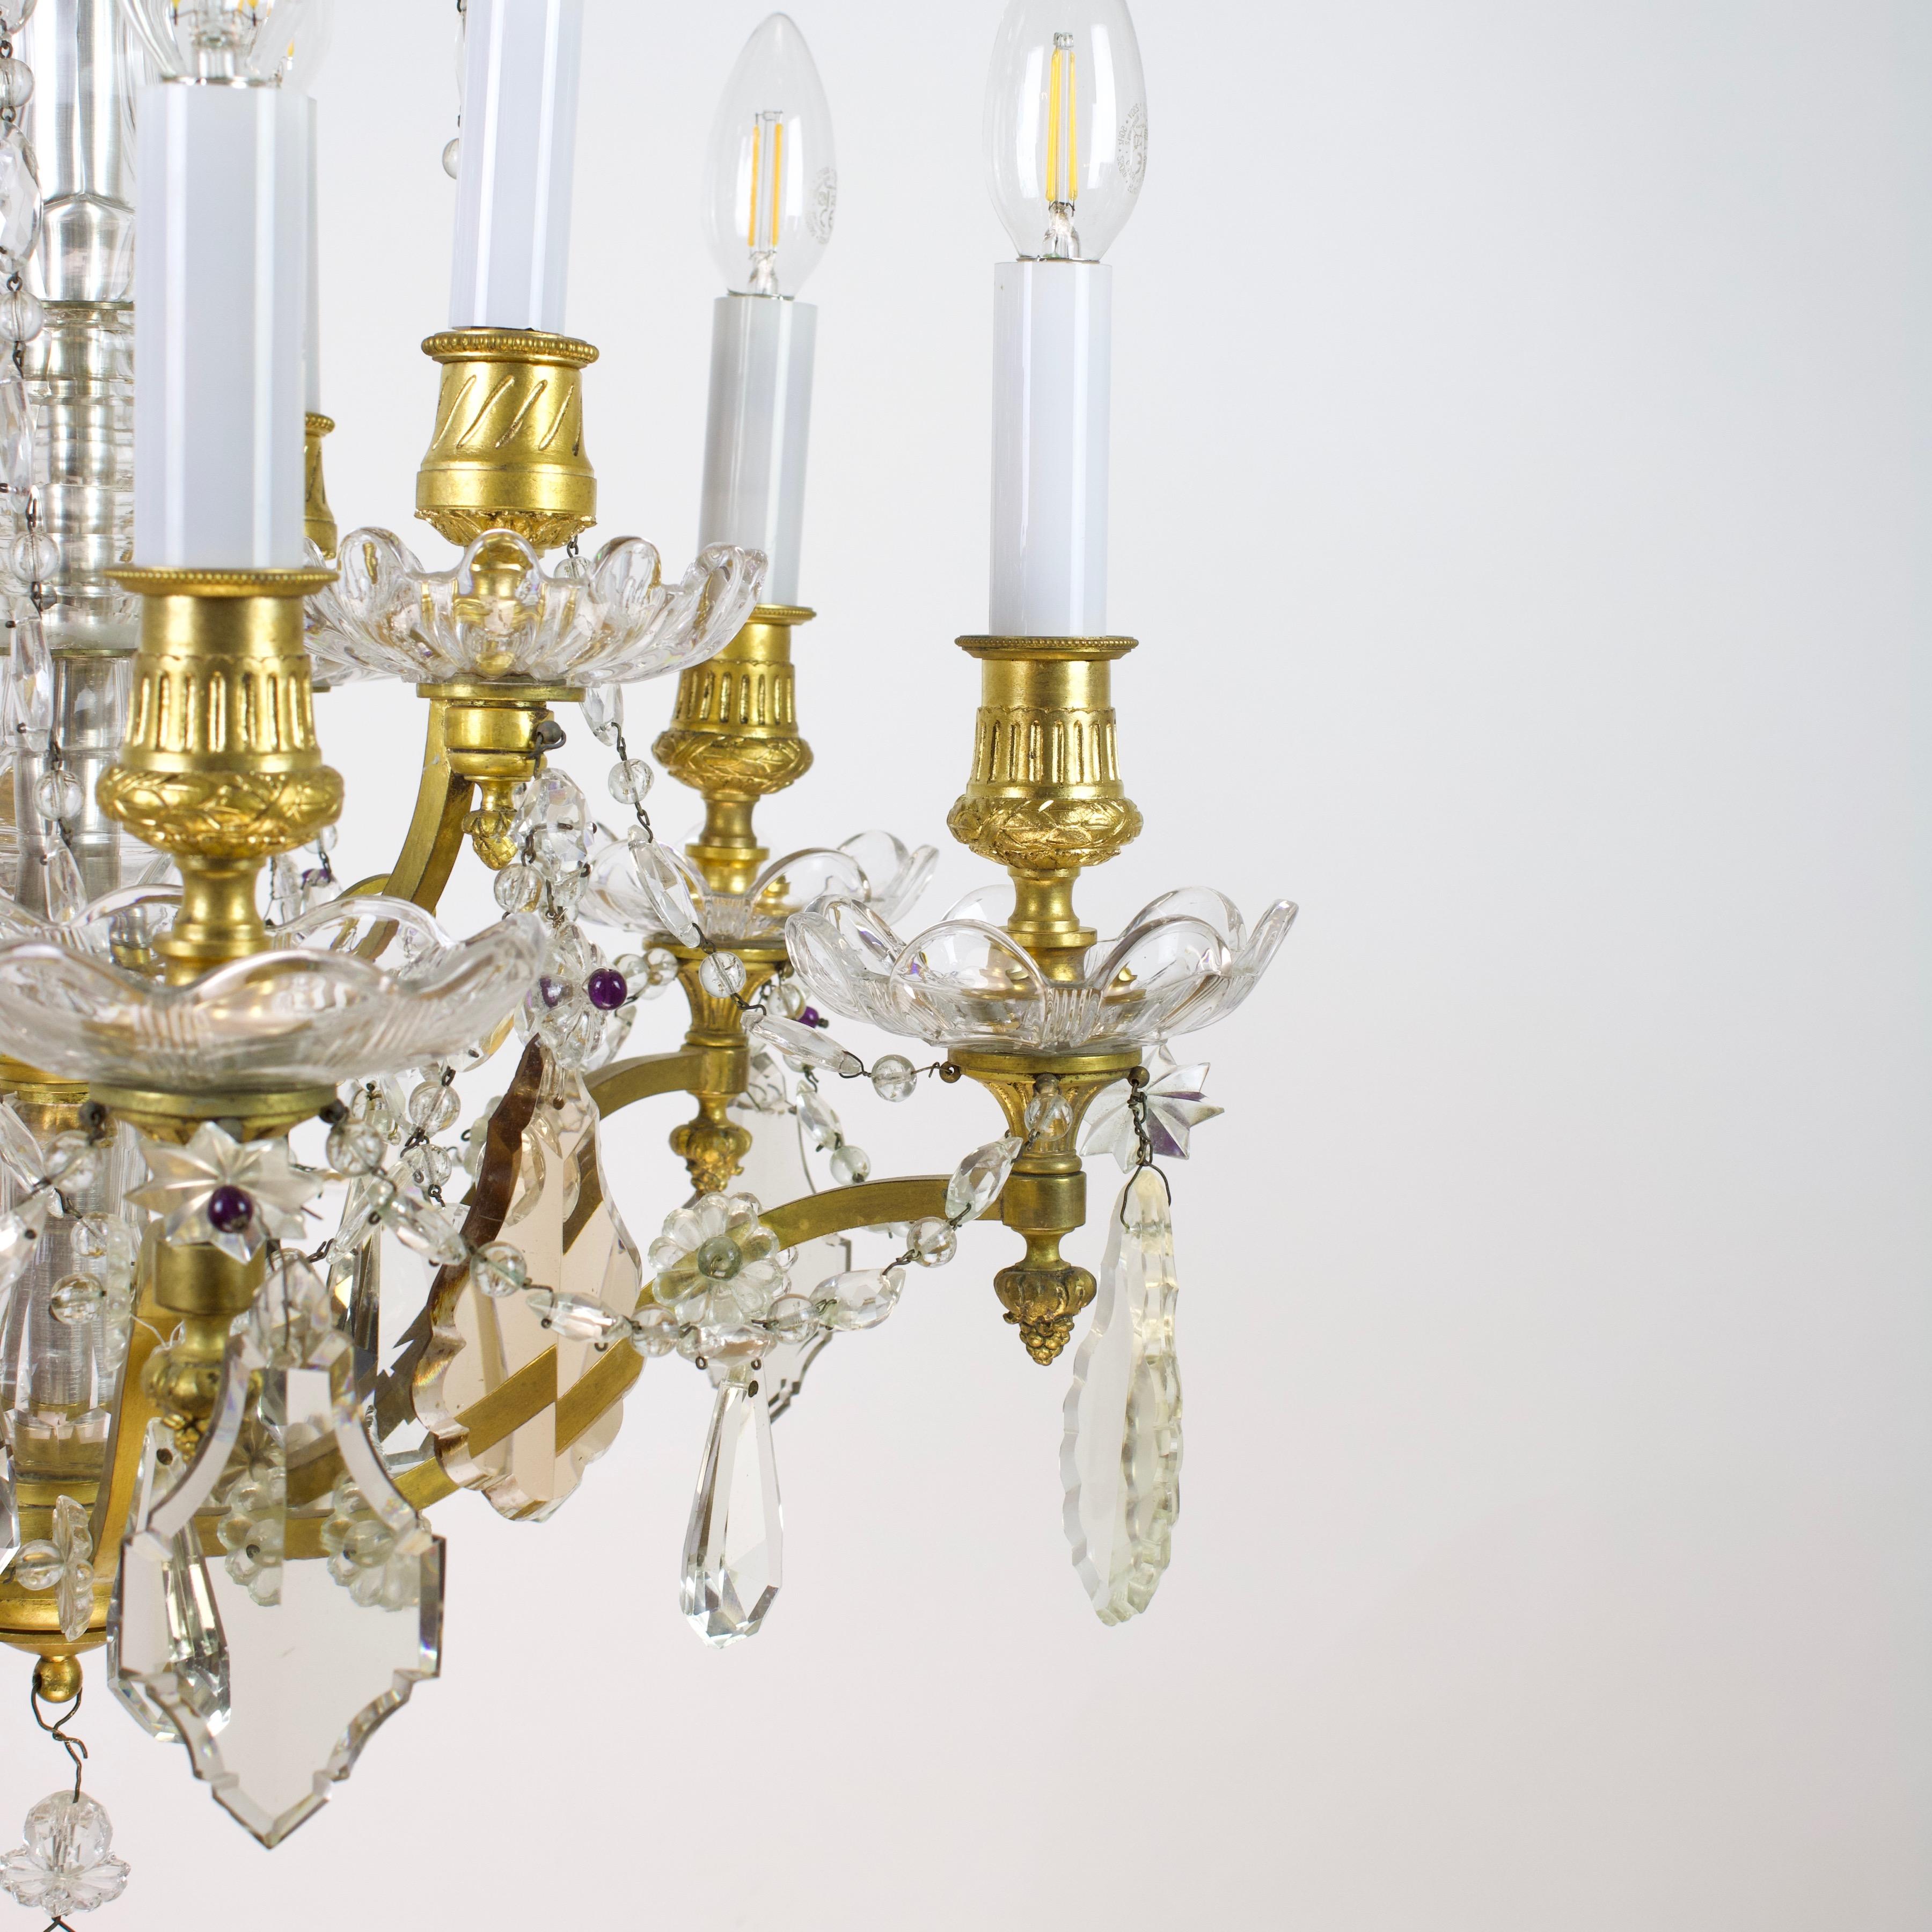 French Maison Colin 19th Century Louis XV gilt bronze cut crystal chandelier

A 9-light French Louis XV chandelier, made in France ca. 1880 by Maison COLIN featuring gilt bronze s-shaped arms on two levels issuing from a central stem covered with